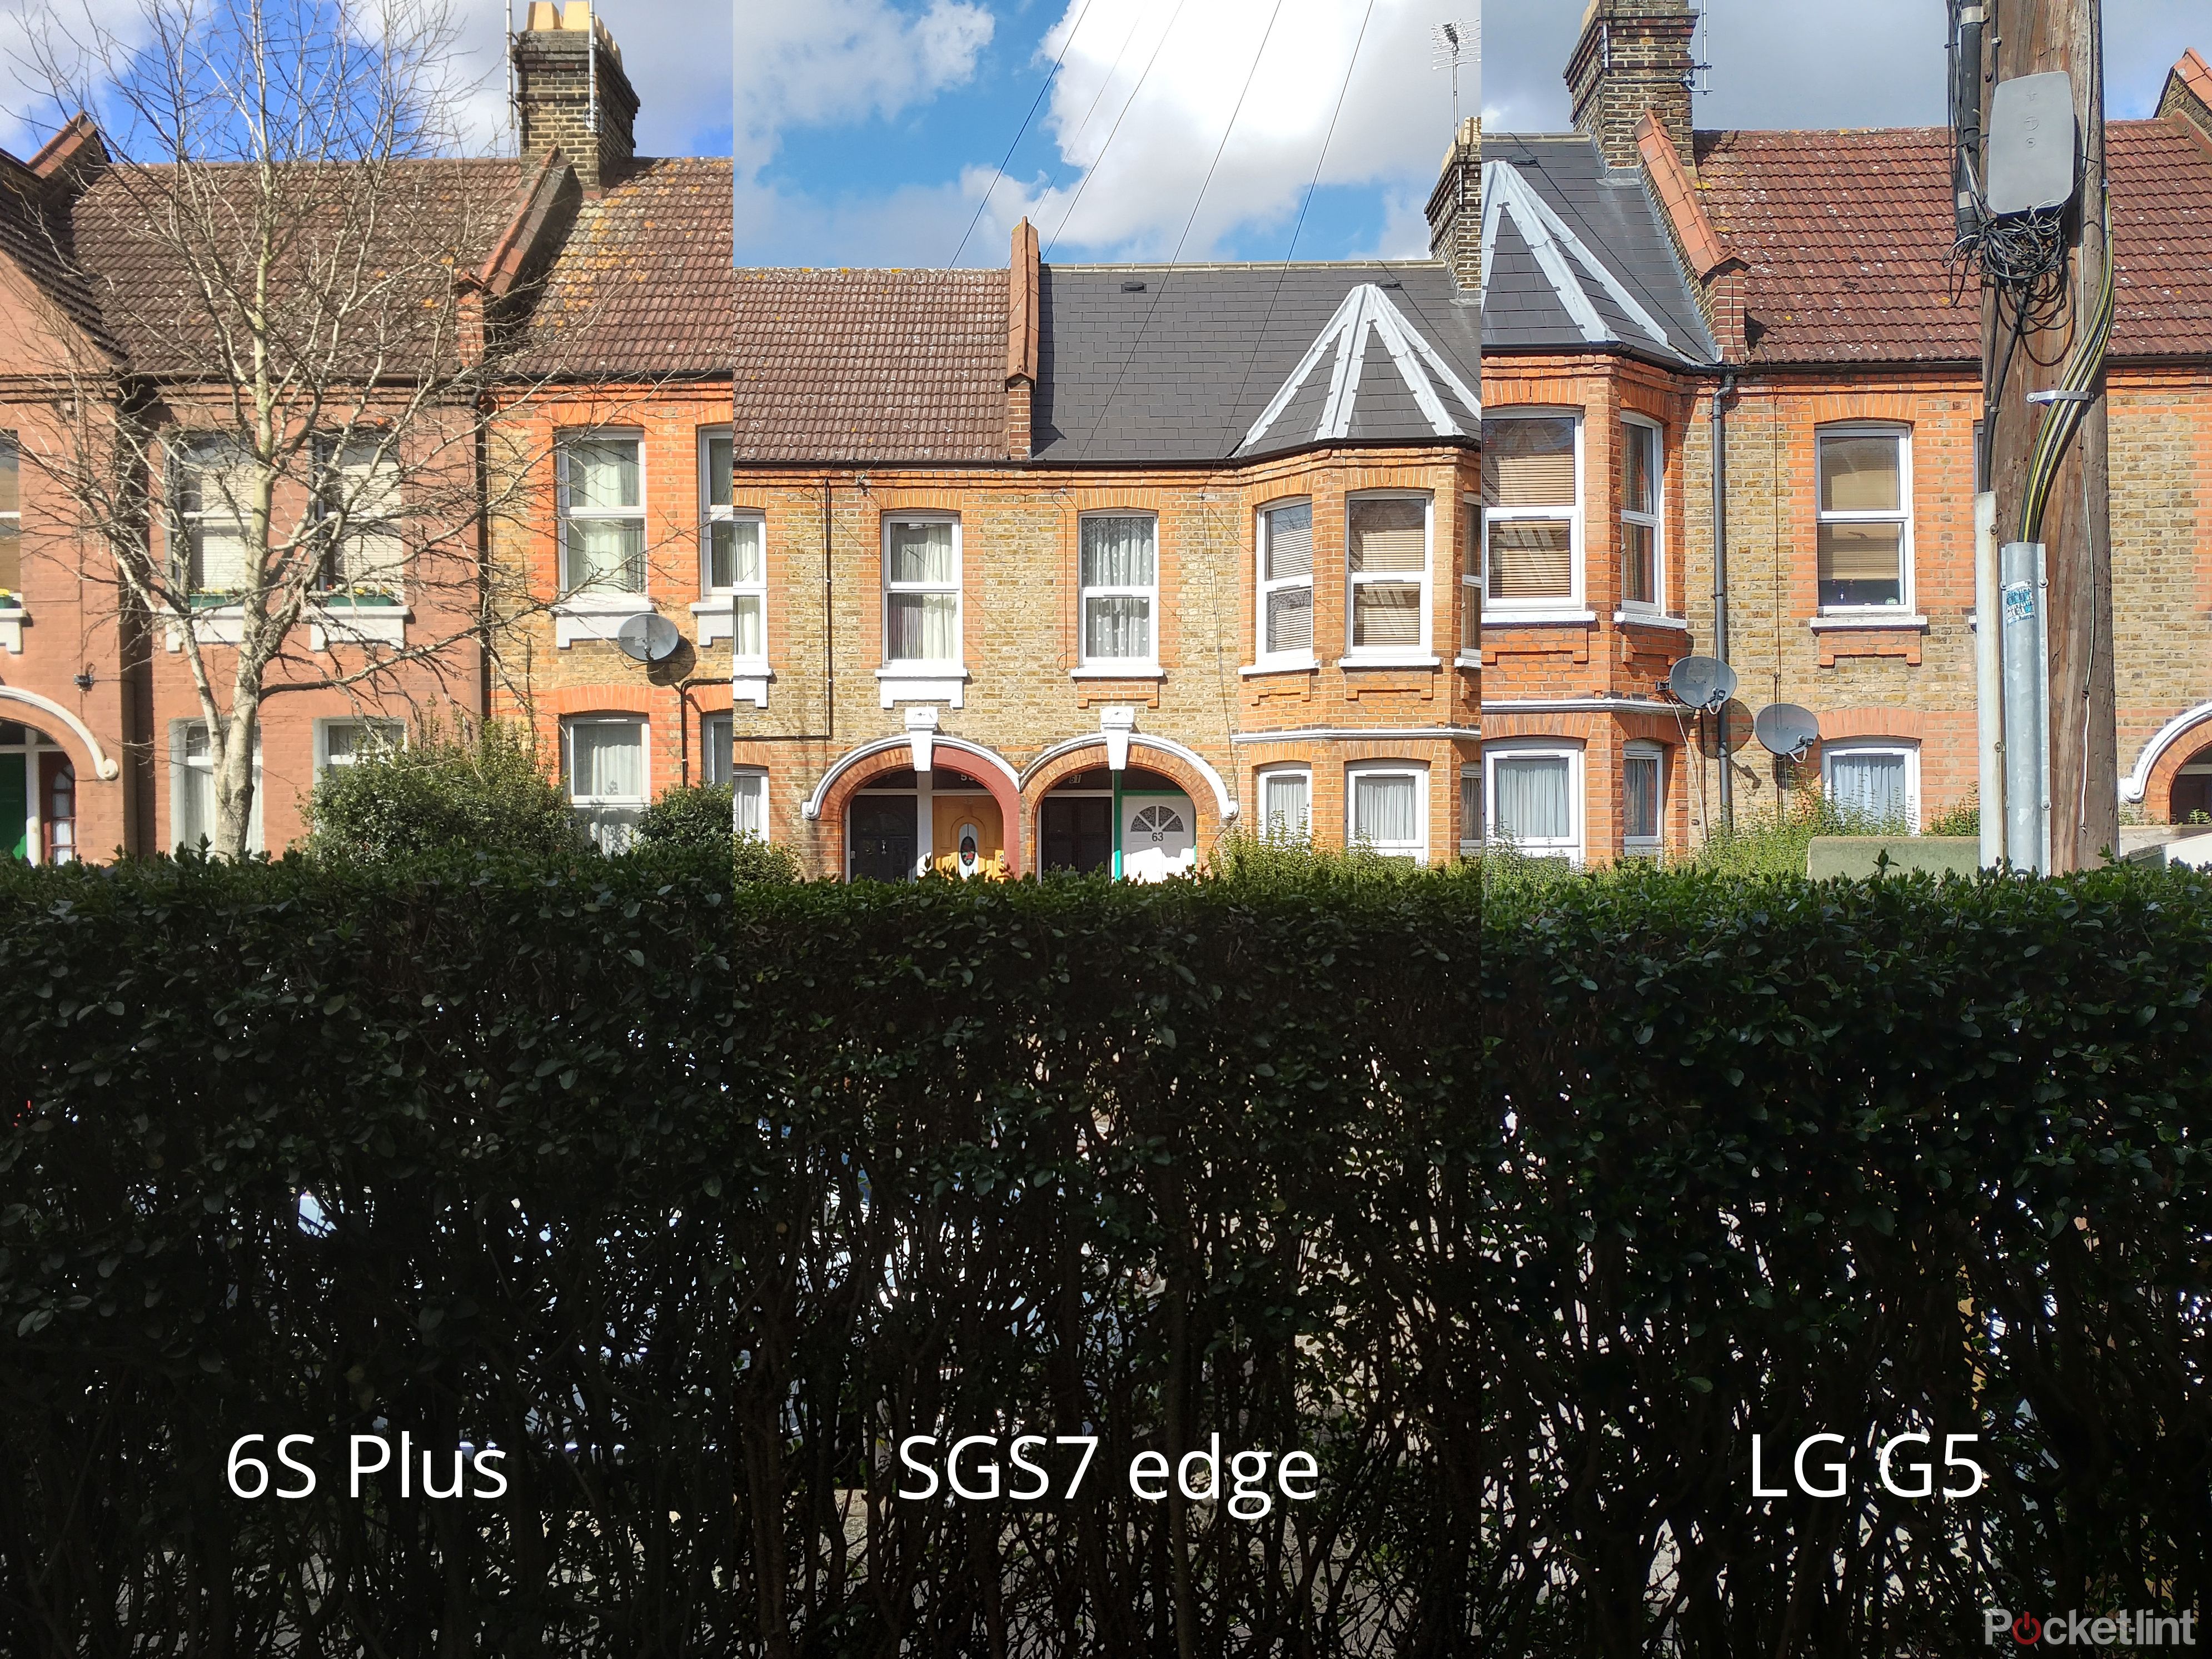 iphone 6s plus vs sgs7 edge vs lg g5 which is best at taking photos image 2